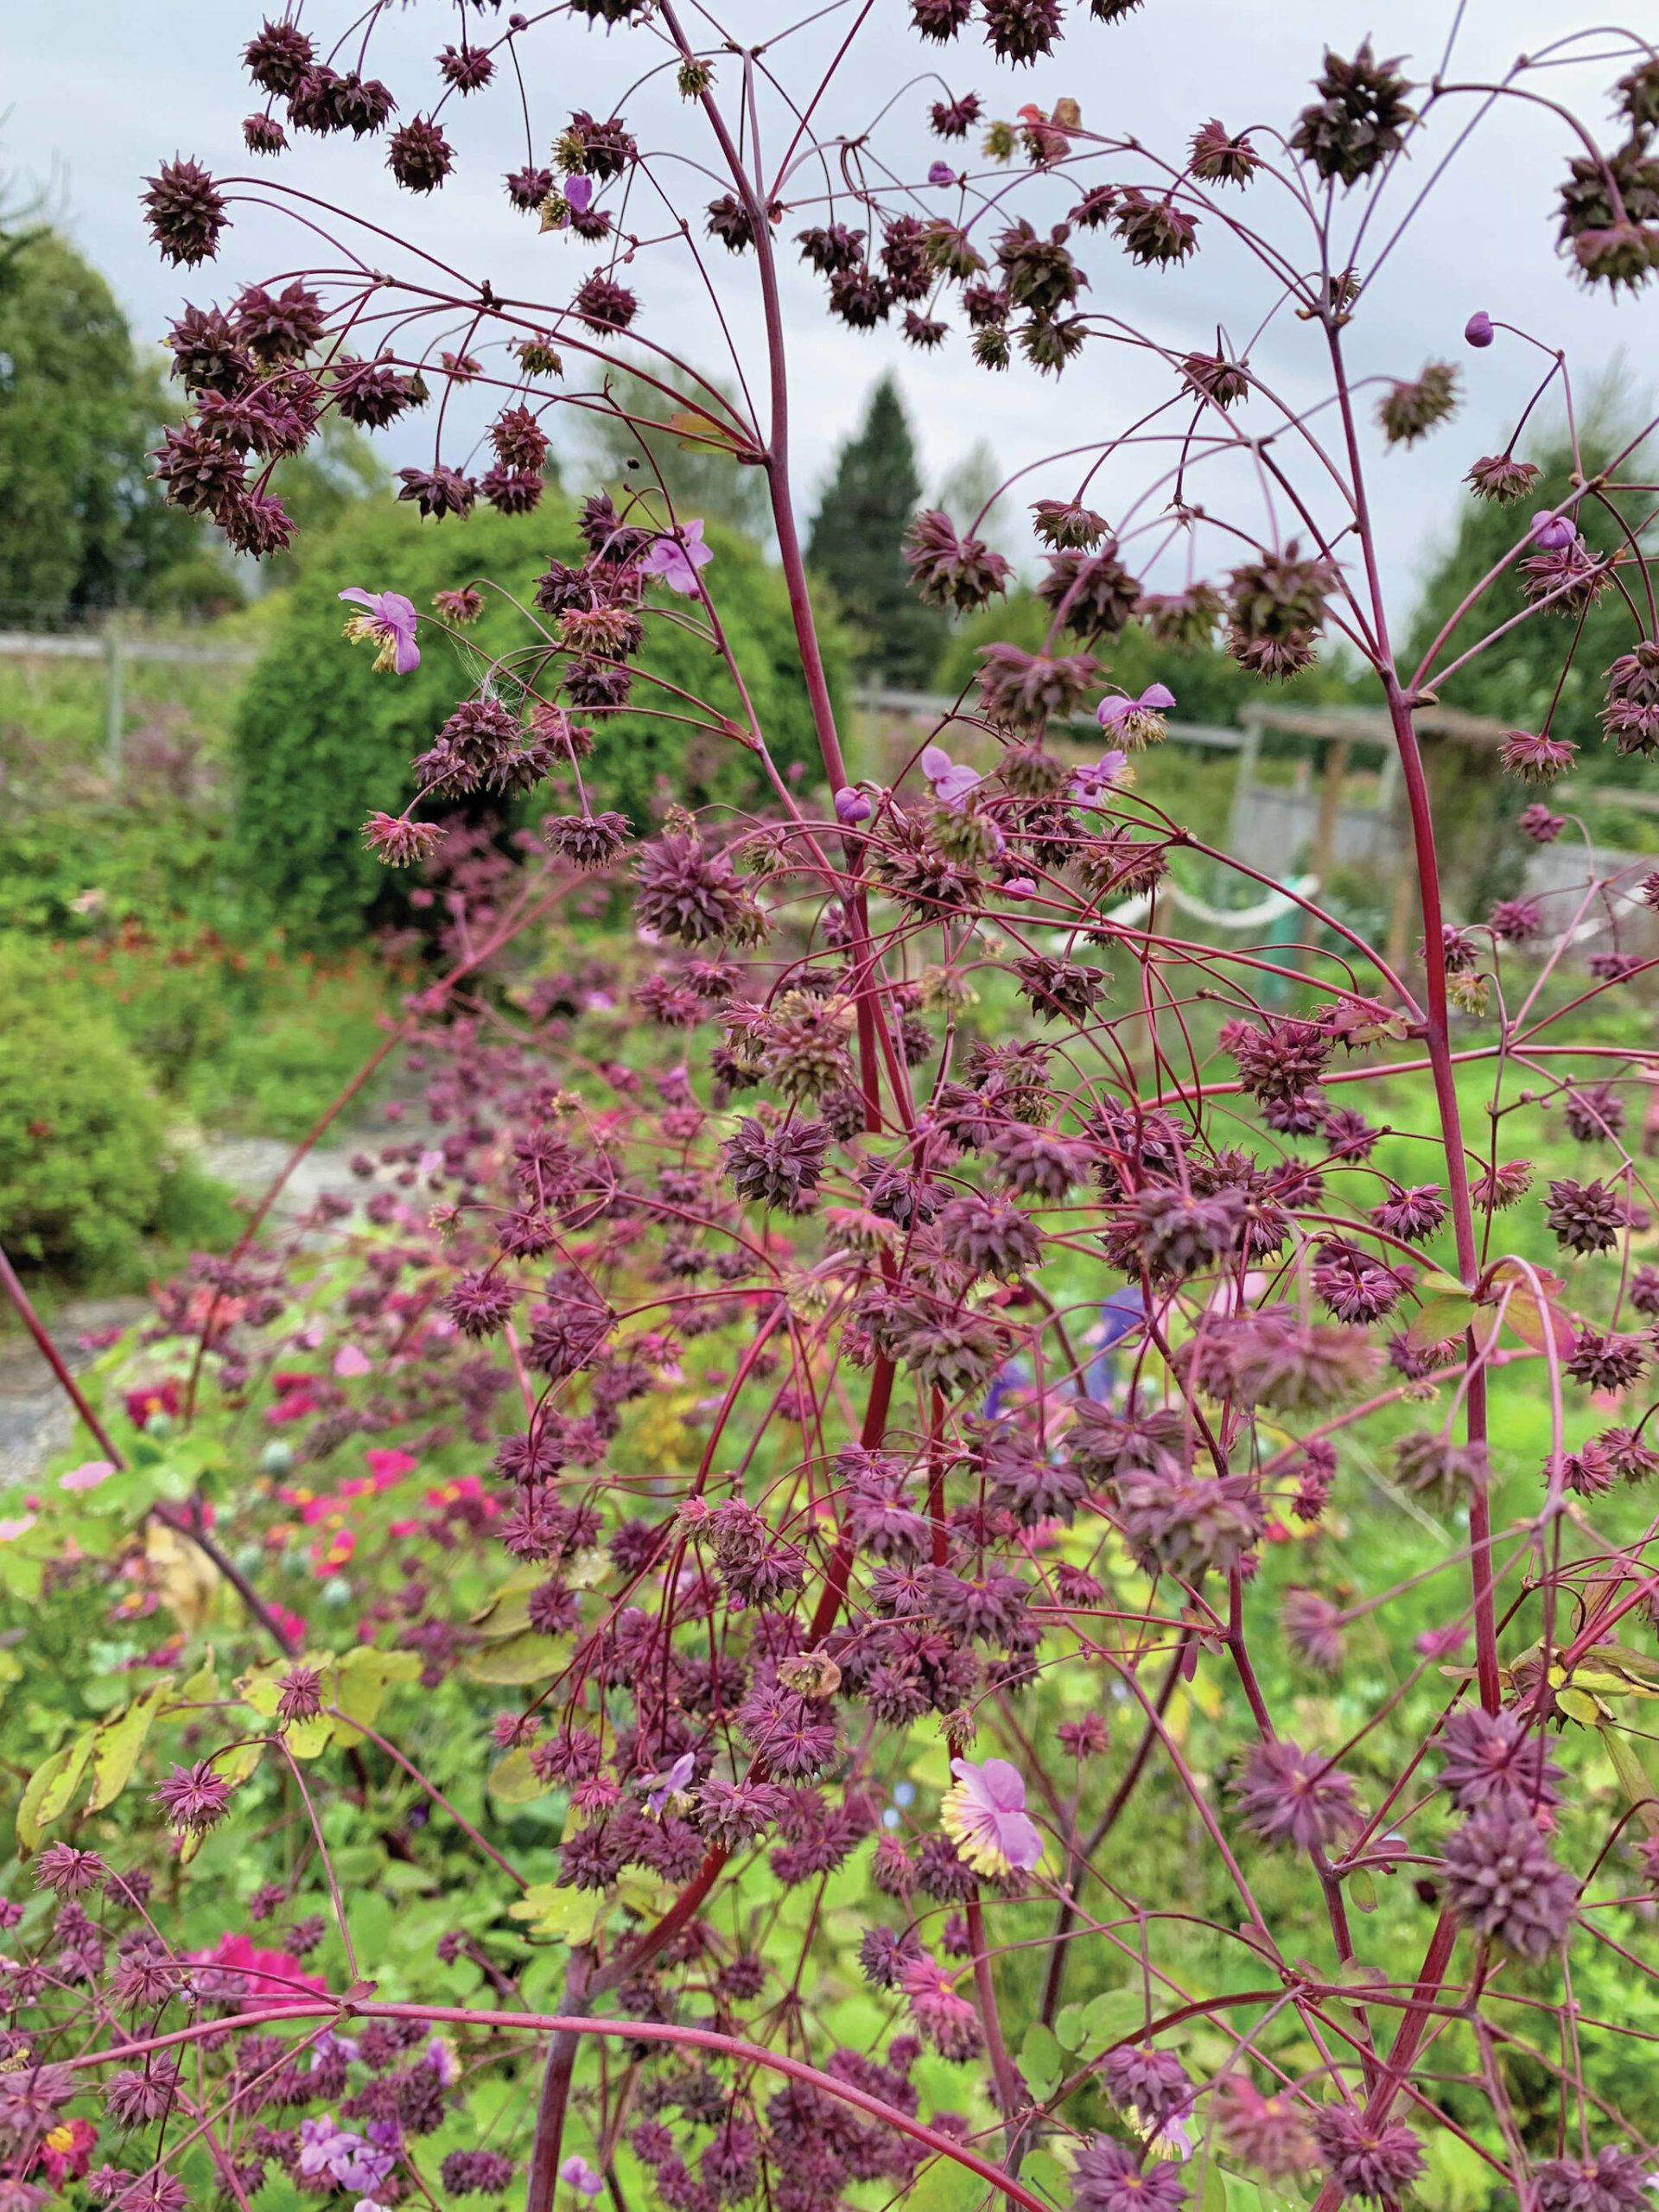 Thalictrum seed heads are just waiting to make way too many seedlings.